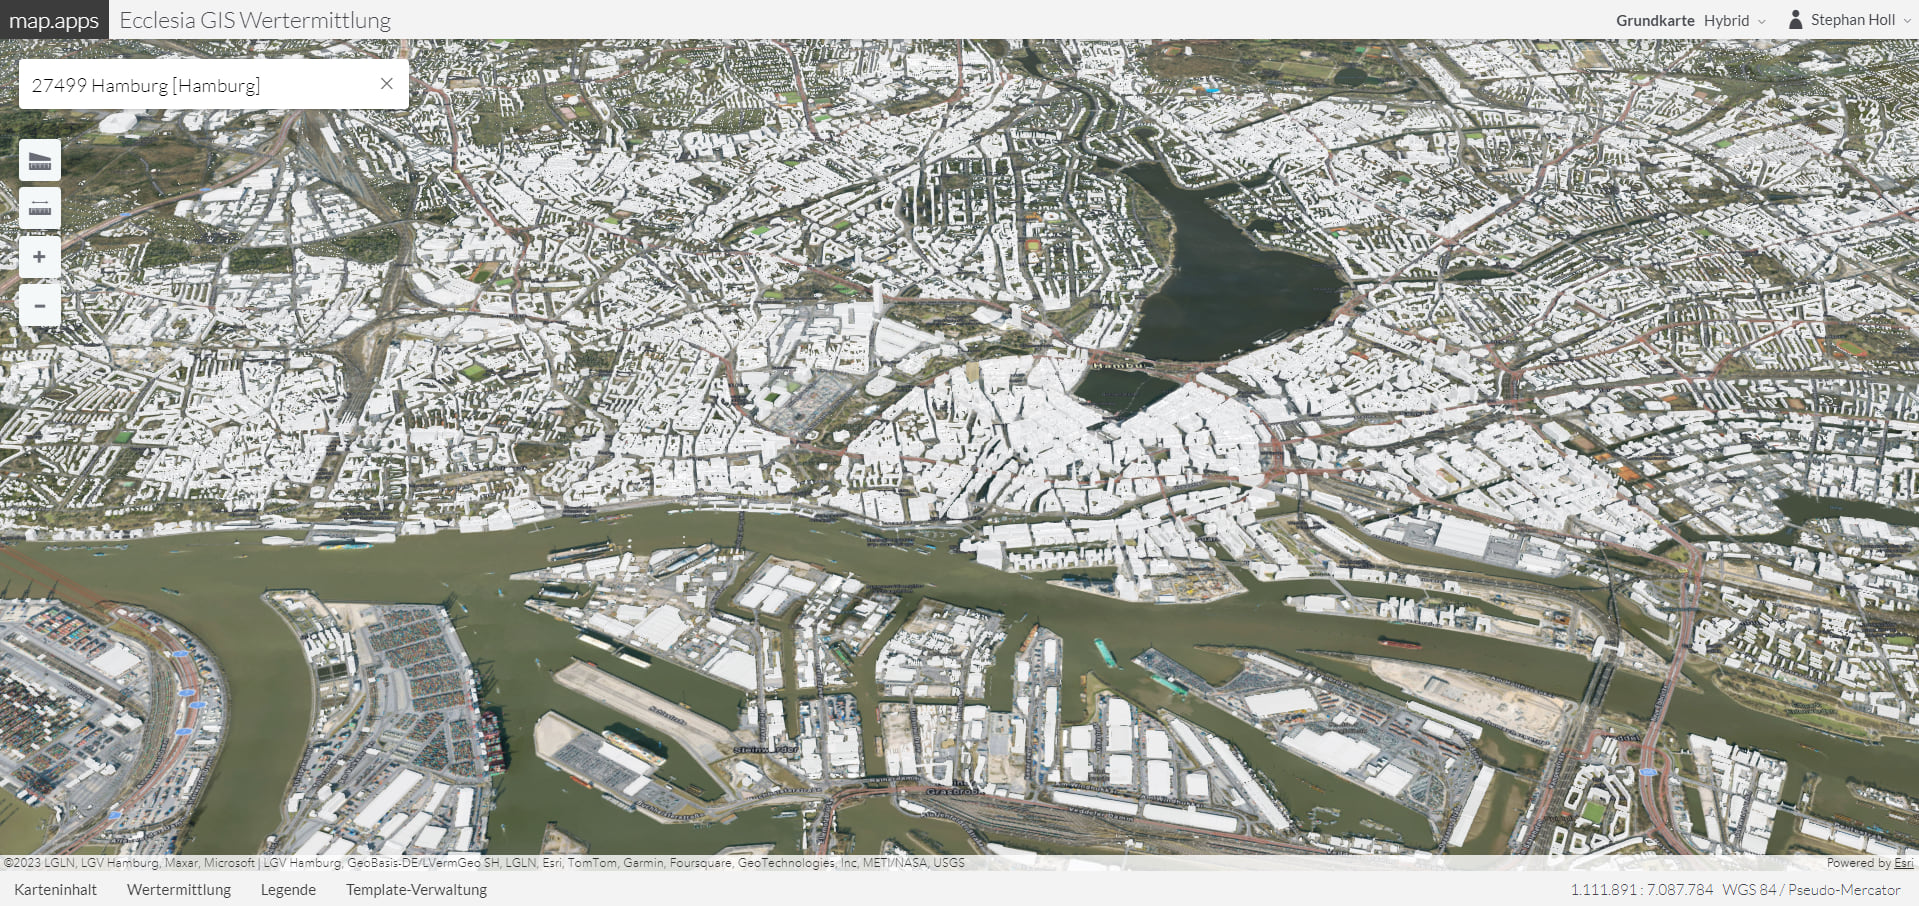 ArcGIS Maps SDK for JavaScript powers the app to visualize 50M+ 3D buildings in Germany